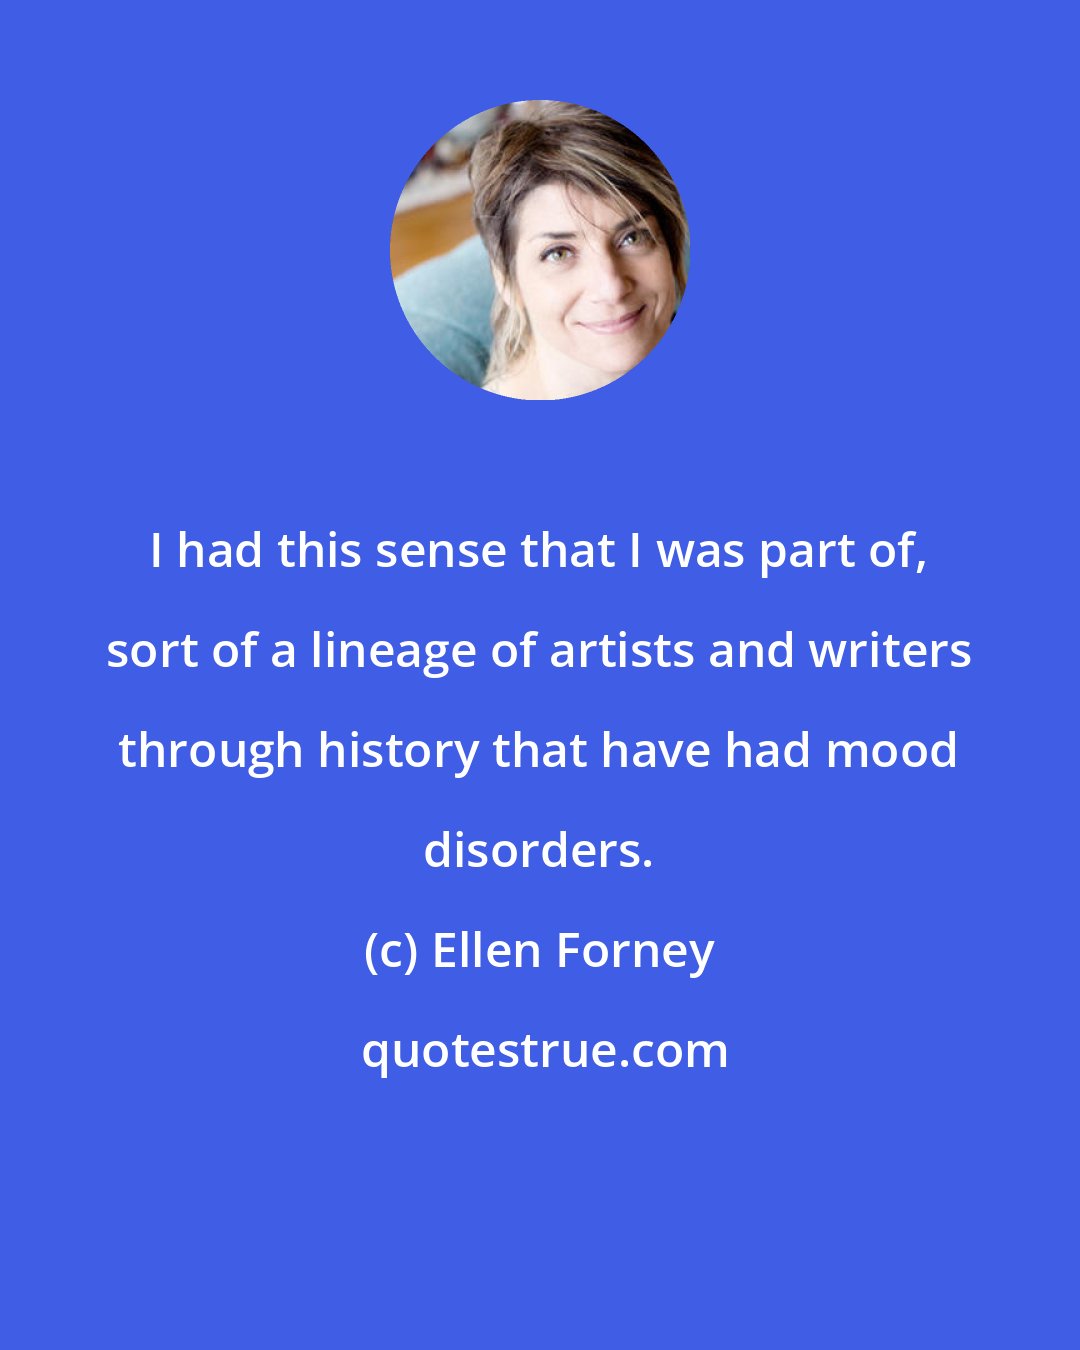 Ellen Forney: I had this sense that I was part of, sort of a lineage of artists and writers through history that have had mood disorders.